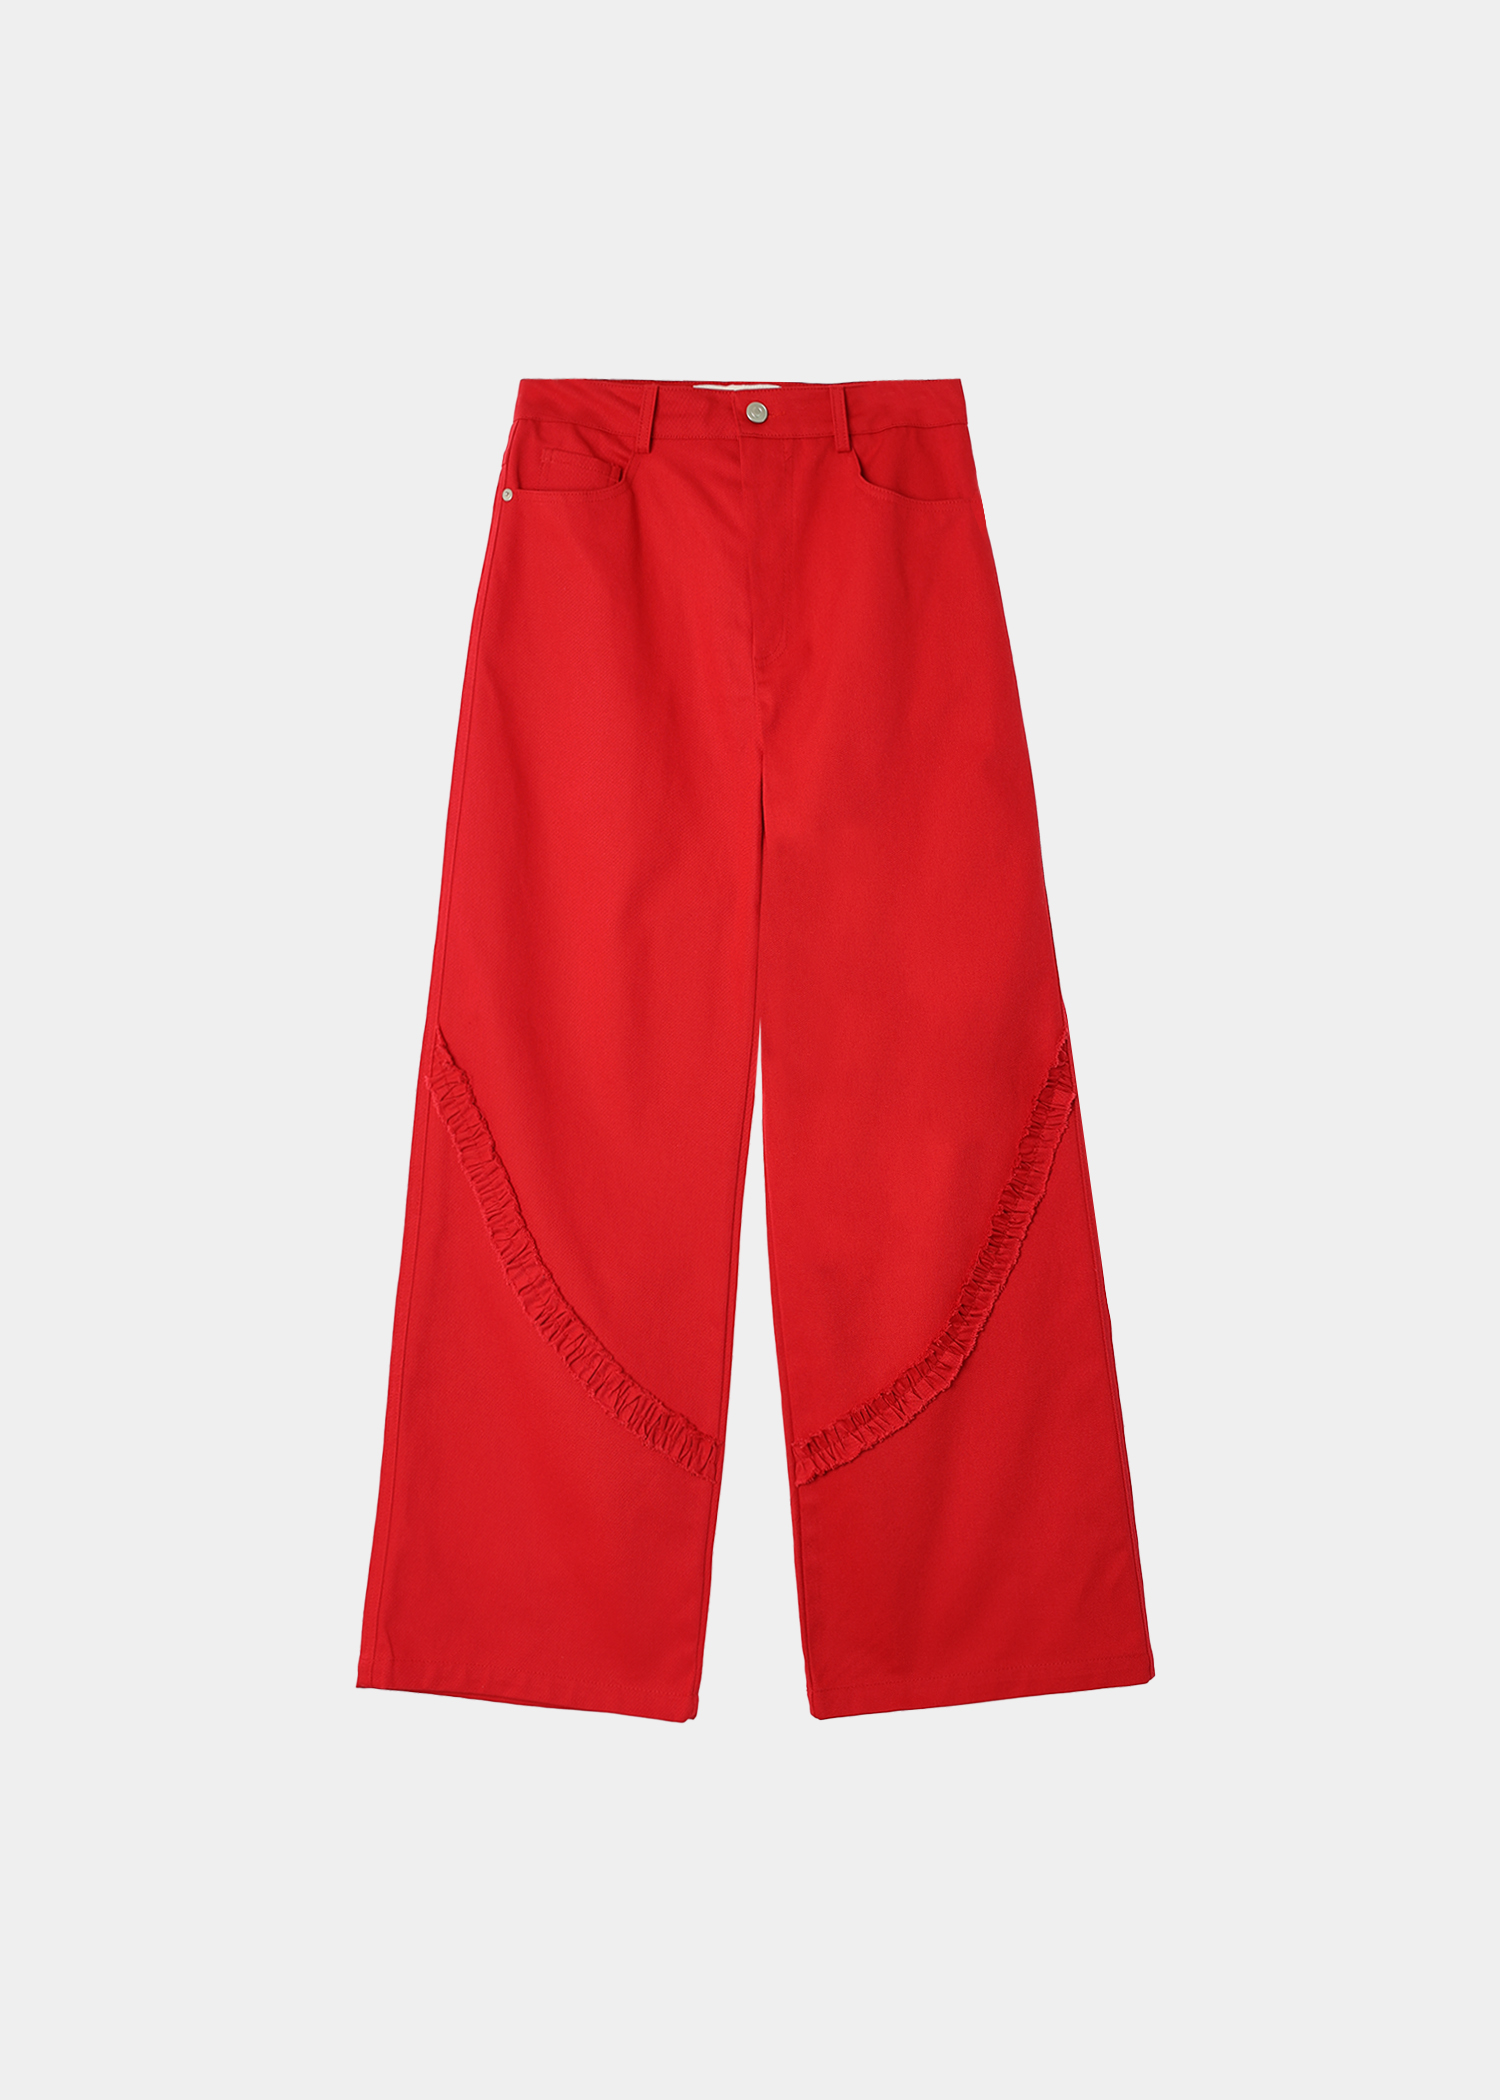 COTTON LACE WIDE PANTS - RED